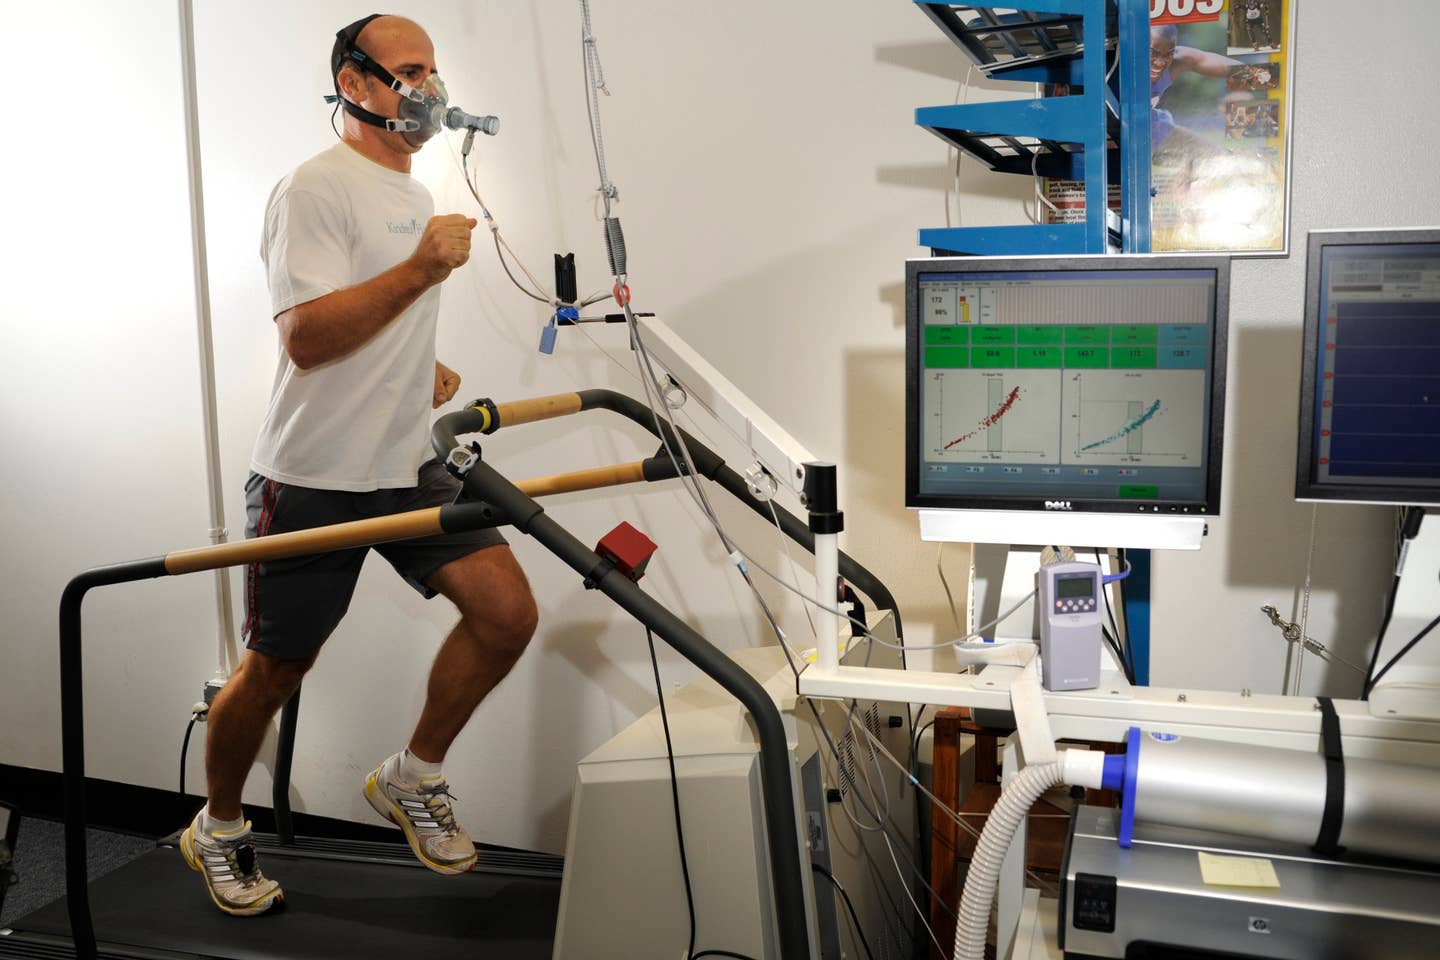 Capt. Dustin Benker runs on a treadmill at the U.S. Air Force Academy's Human Performance Laboratory to check his oxygen and carbon dioxide levels while he works out. <small>(U.S. Air Force photo by J. Rachel Spencer)</small>